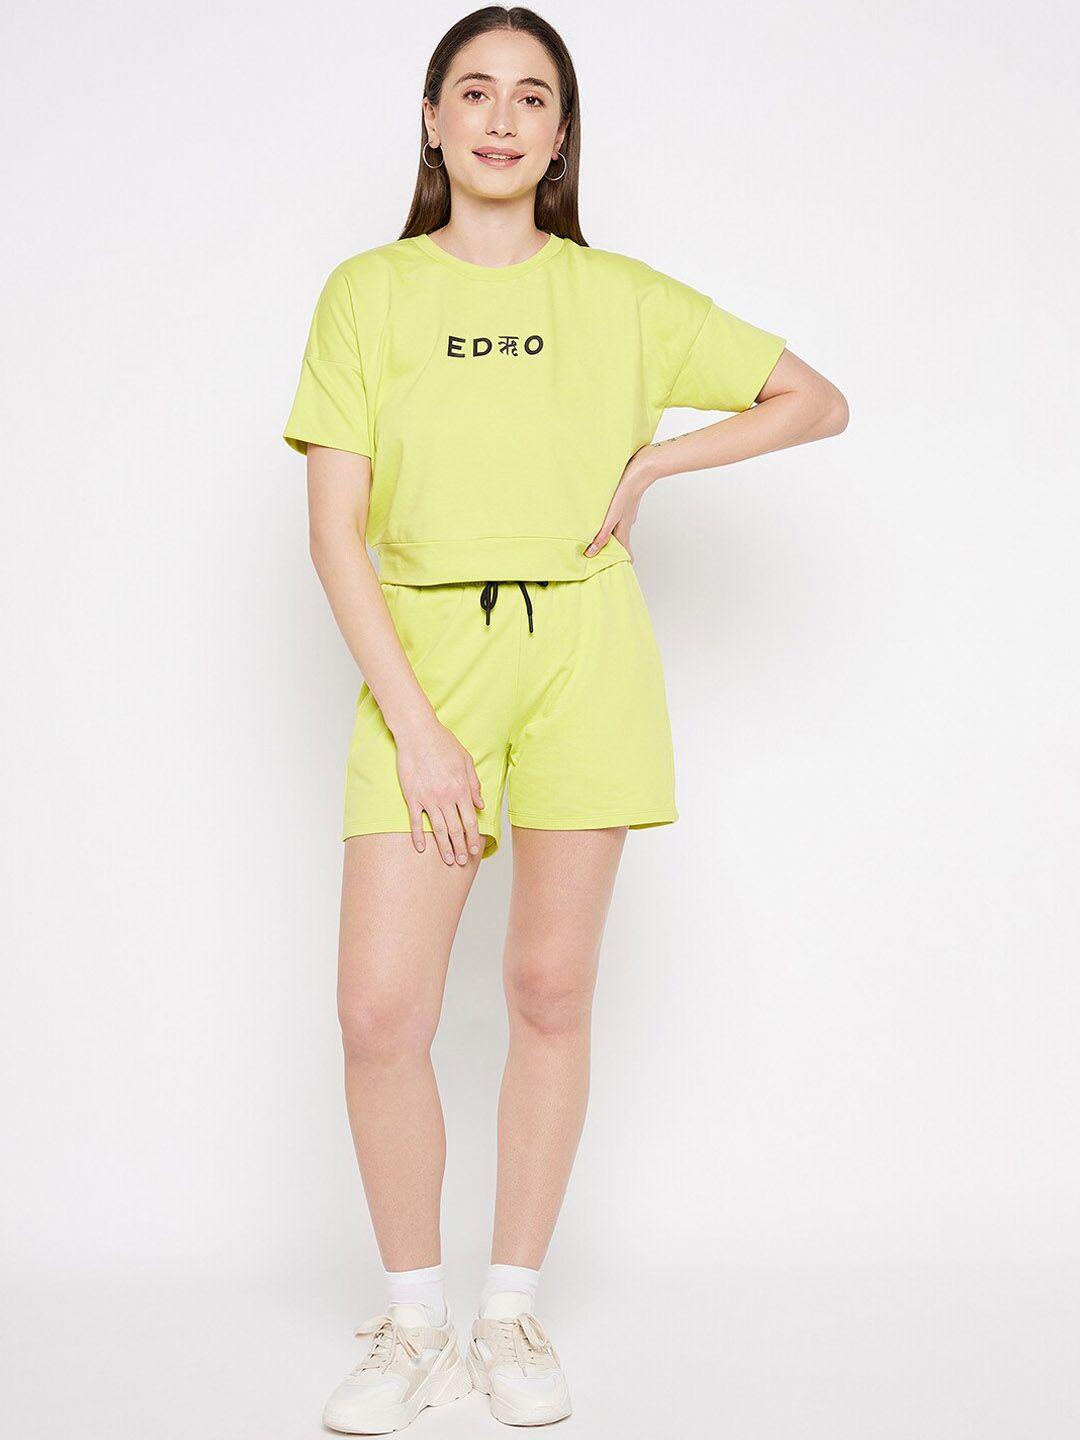 edrio printed pure cotton short sleeves t-shirt with shorts co-ords